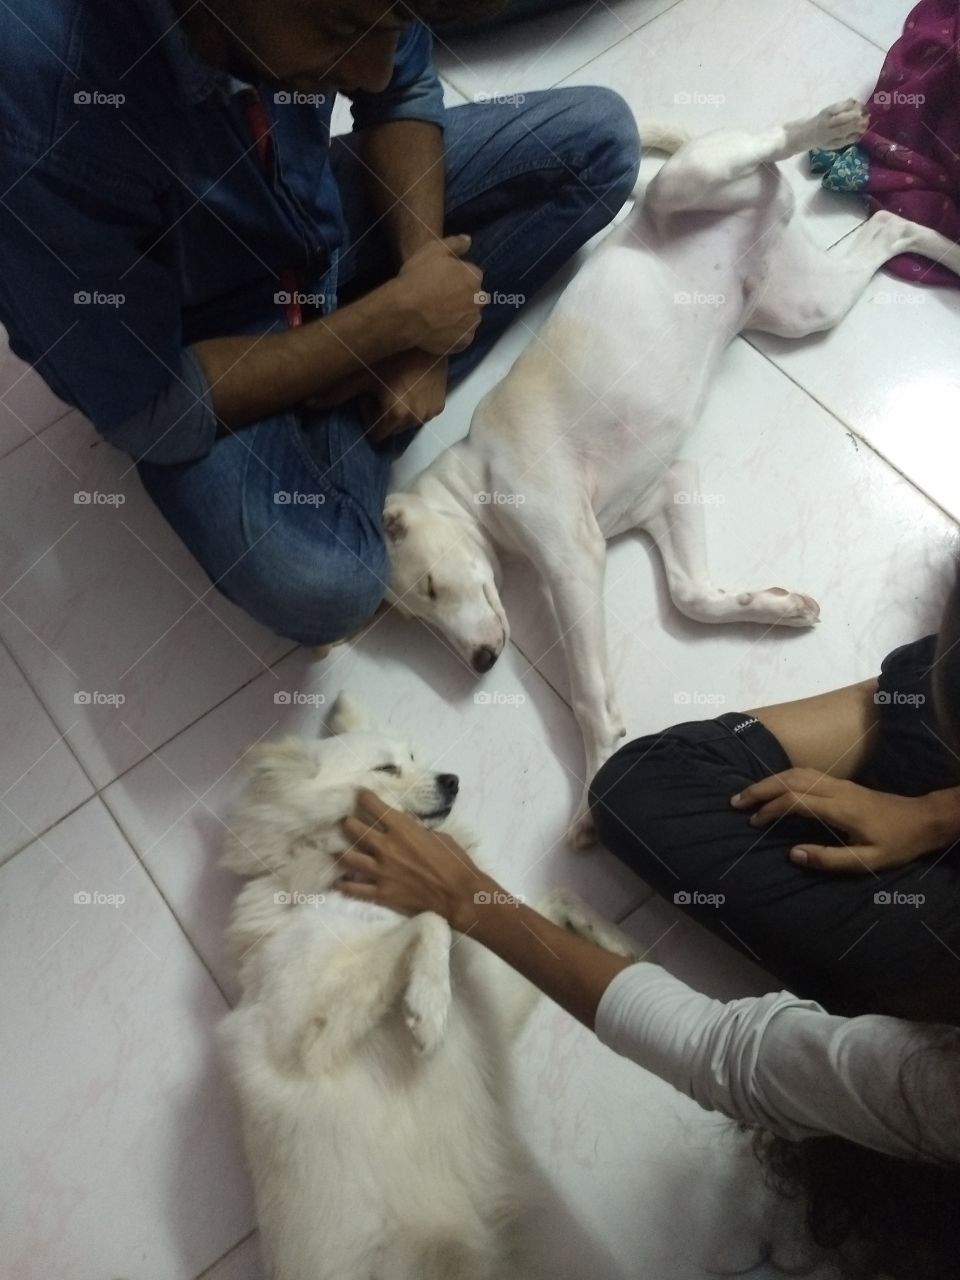 they feel secure with us, pets are like family